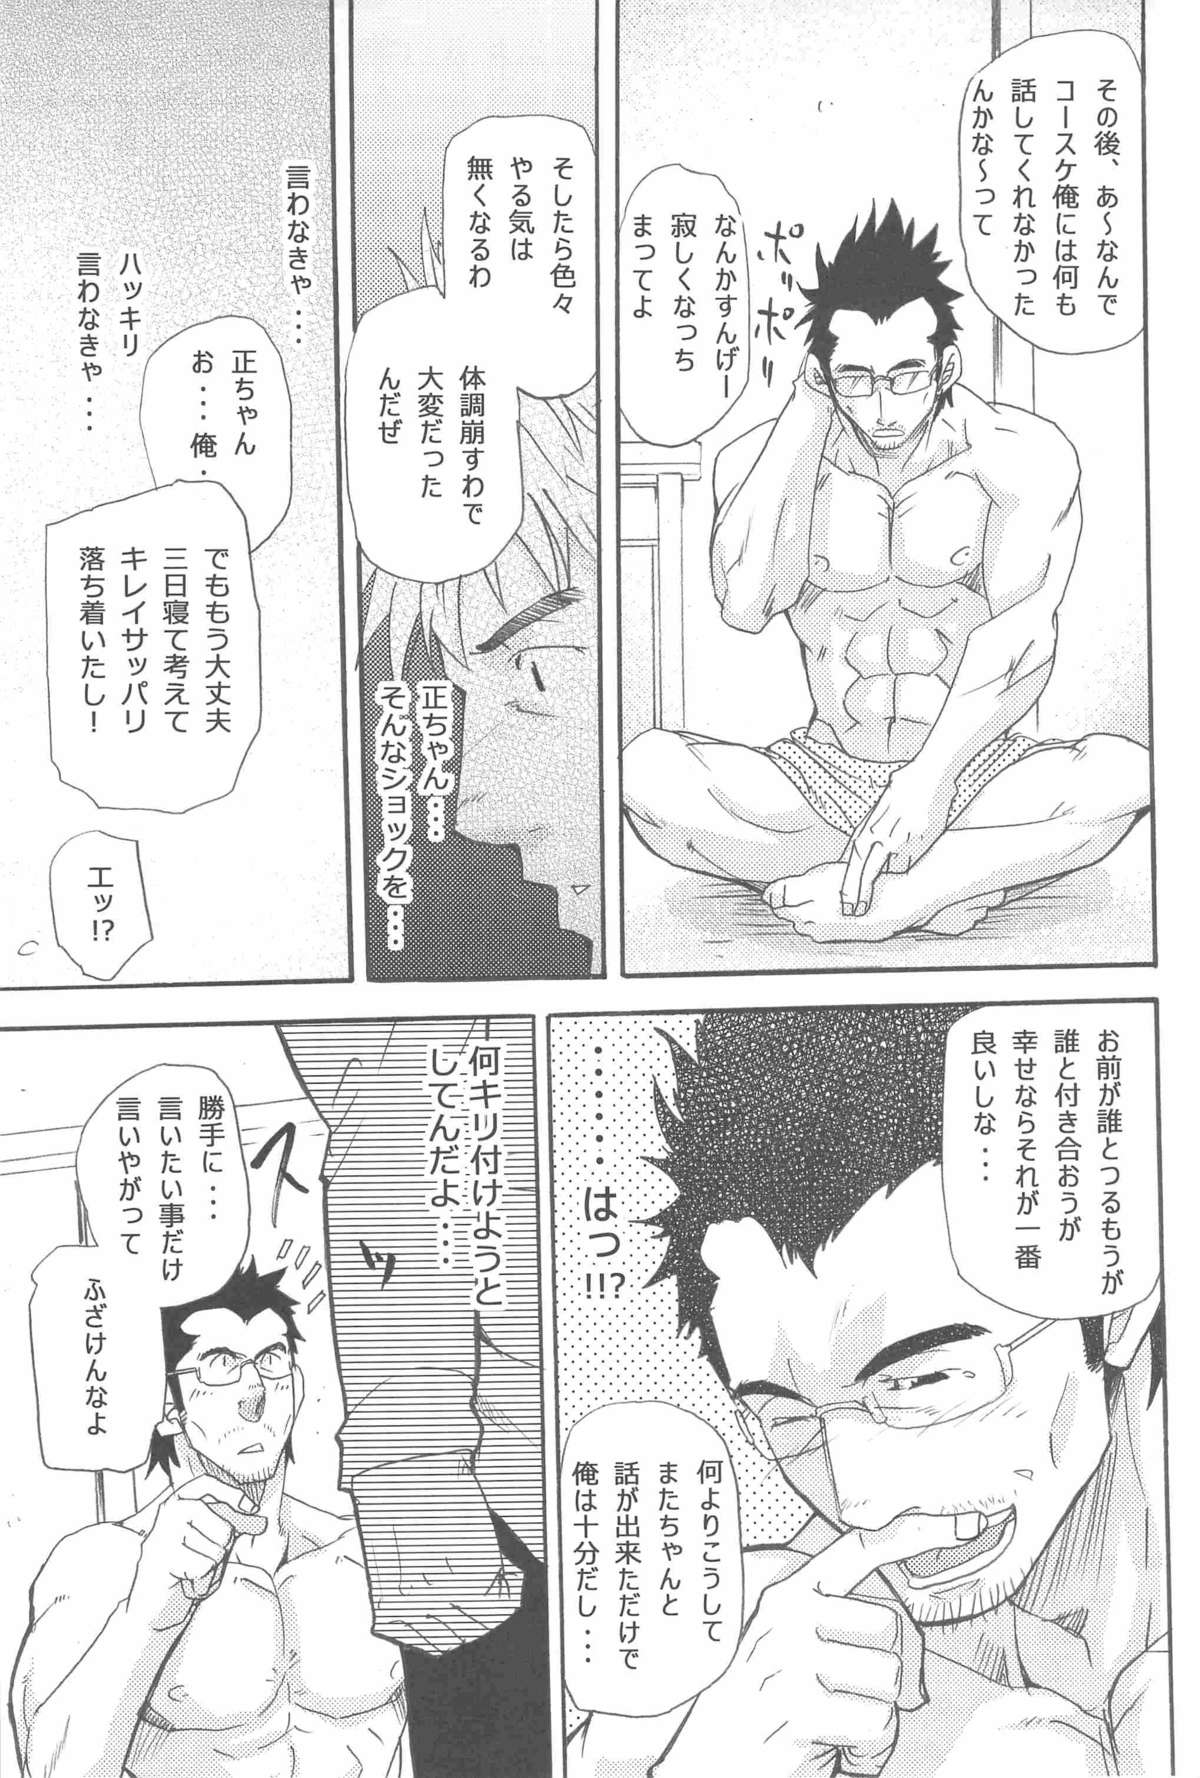 [MATSU Takeshi] More and More of You 5 page 7 full